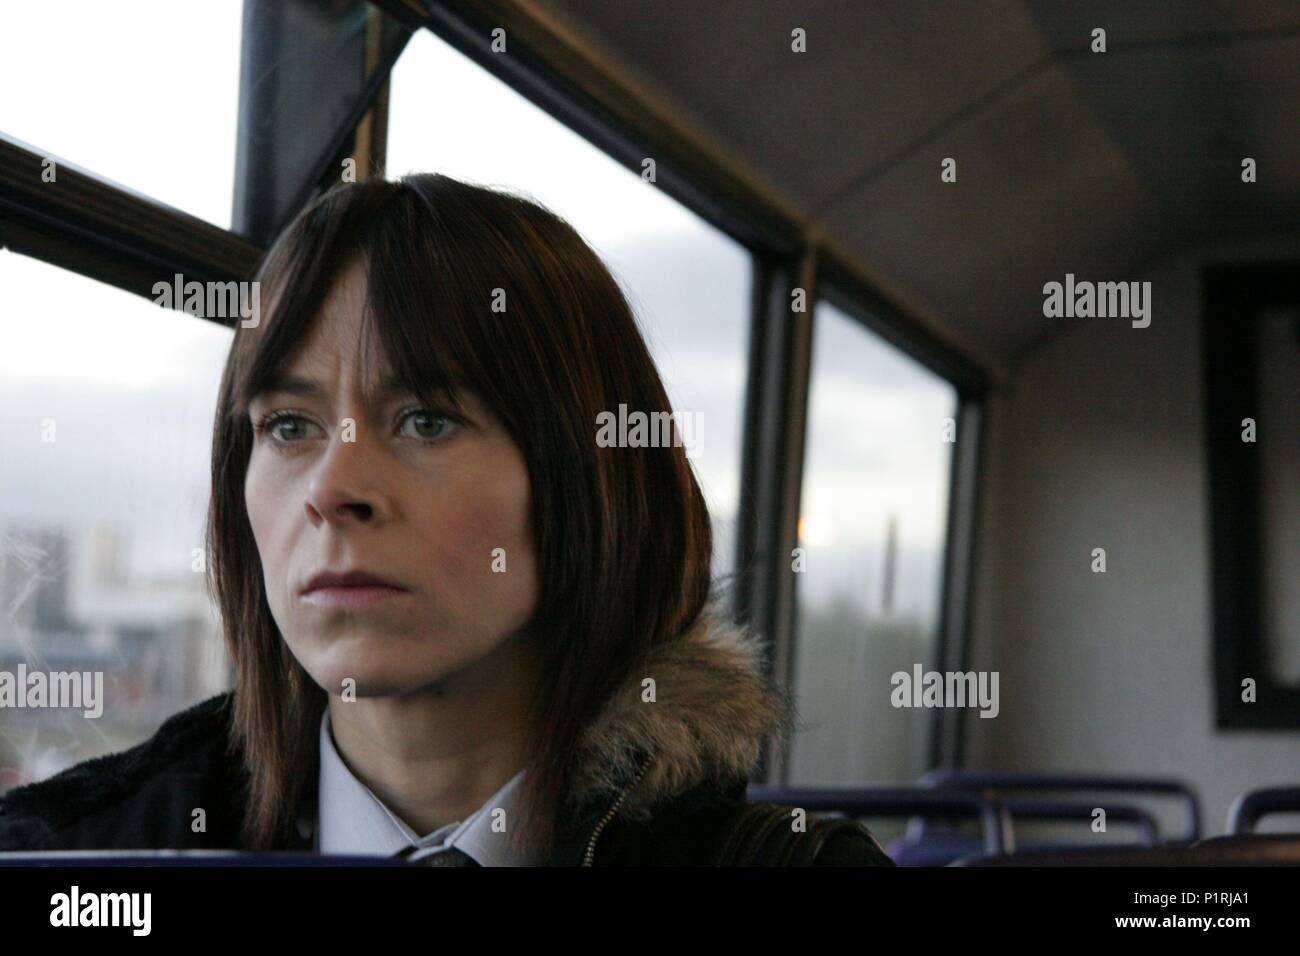 Original Film Title: RED ROAD.  English Title: RED ROAD.  Film Director: ANDREA ARNOLD.  Year: 2006.  Stars: KATE DICKIE. Credit: SIGMA / Album Stock Photo